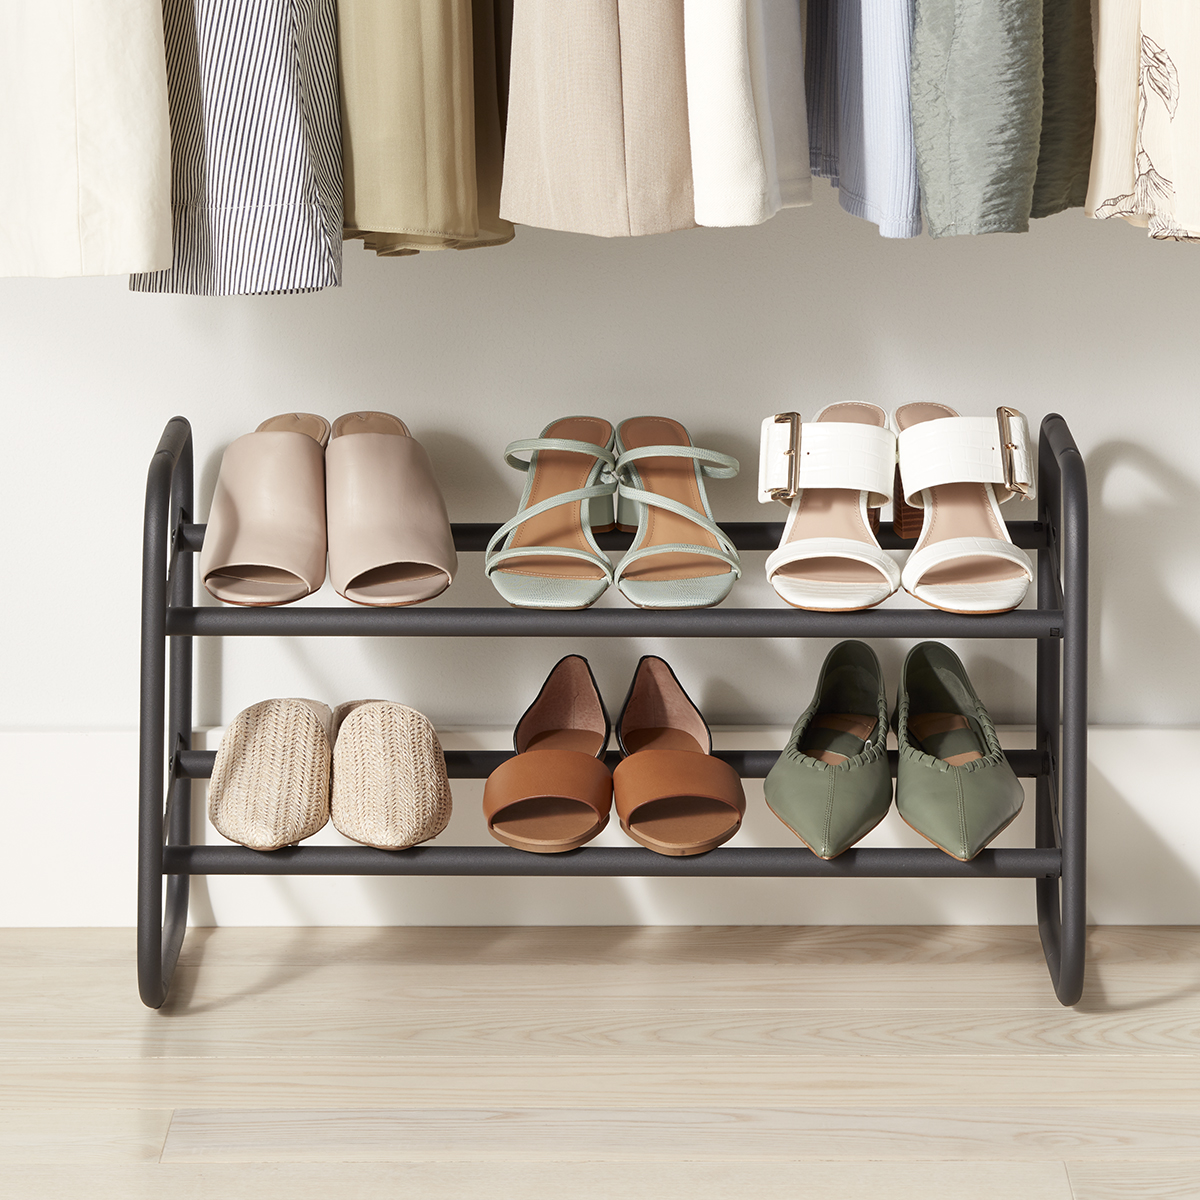 2-Tier Expandable Shoe Rack with Pivoting Bars | The Container Store